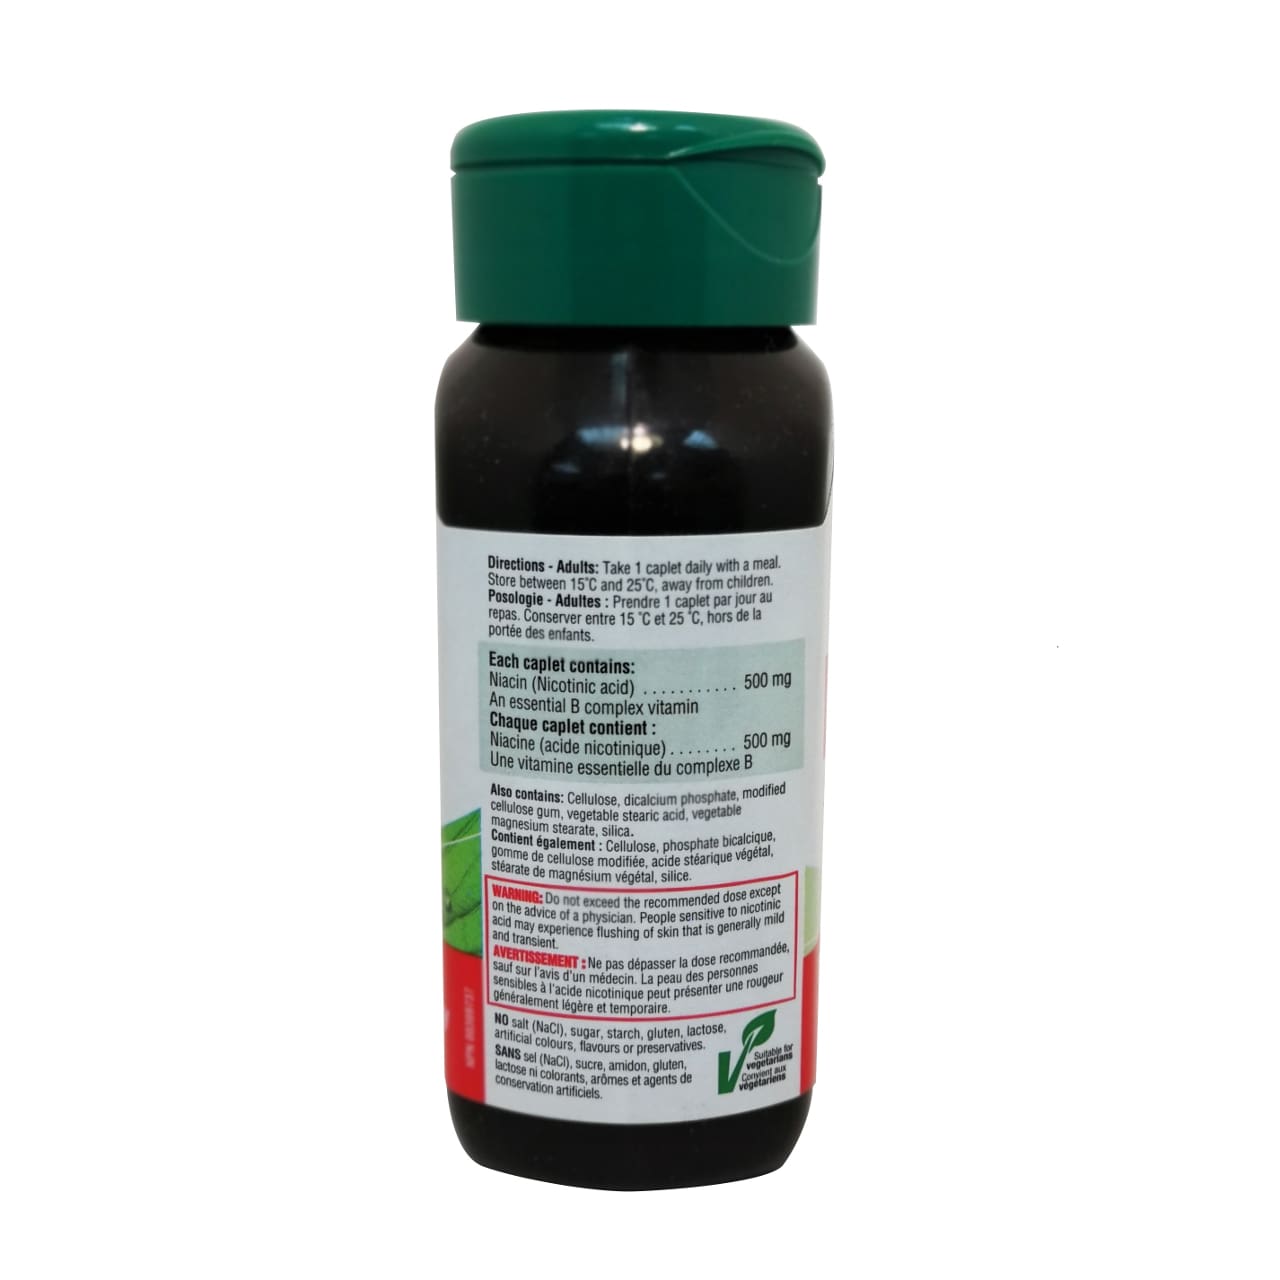 Product details, ingredients, and directions for Jamieson Niacin 500mg in French and English